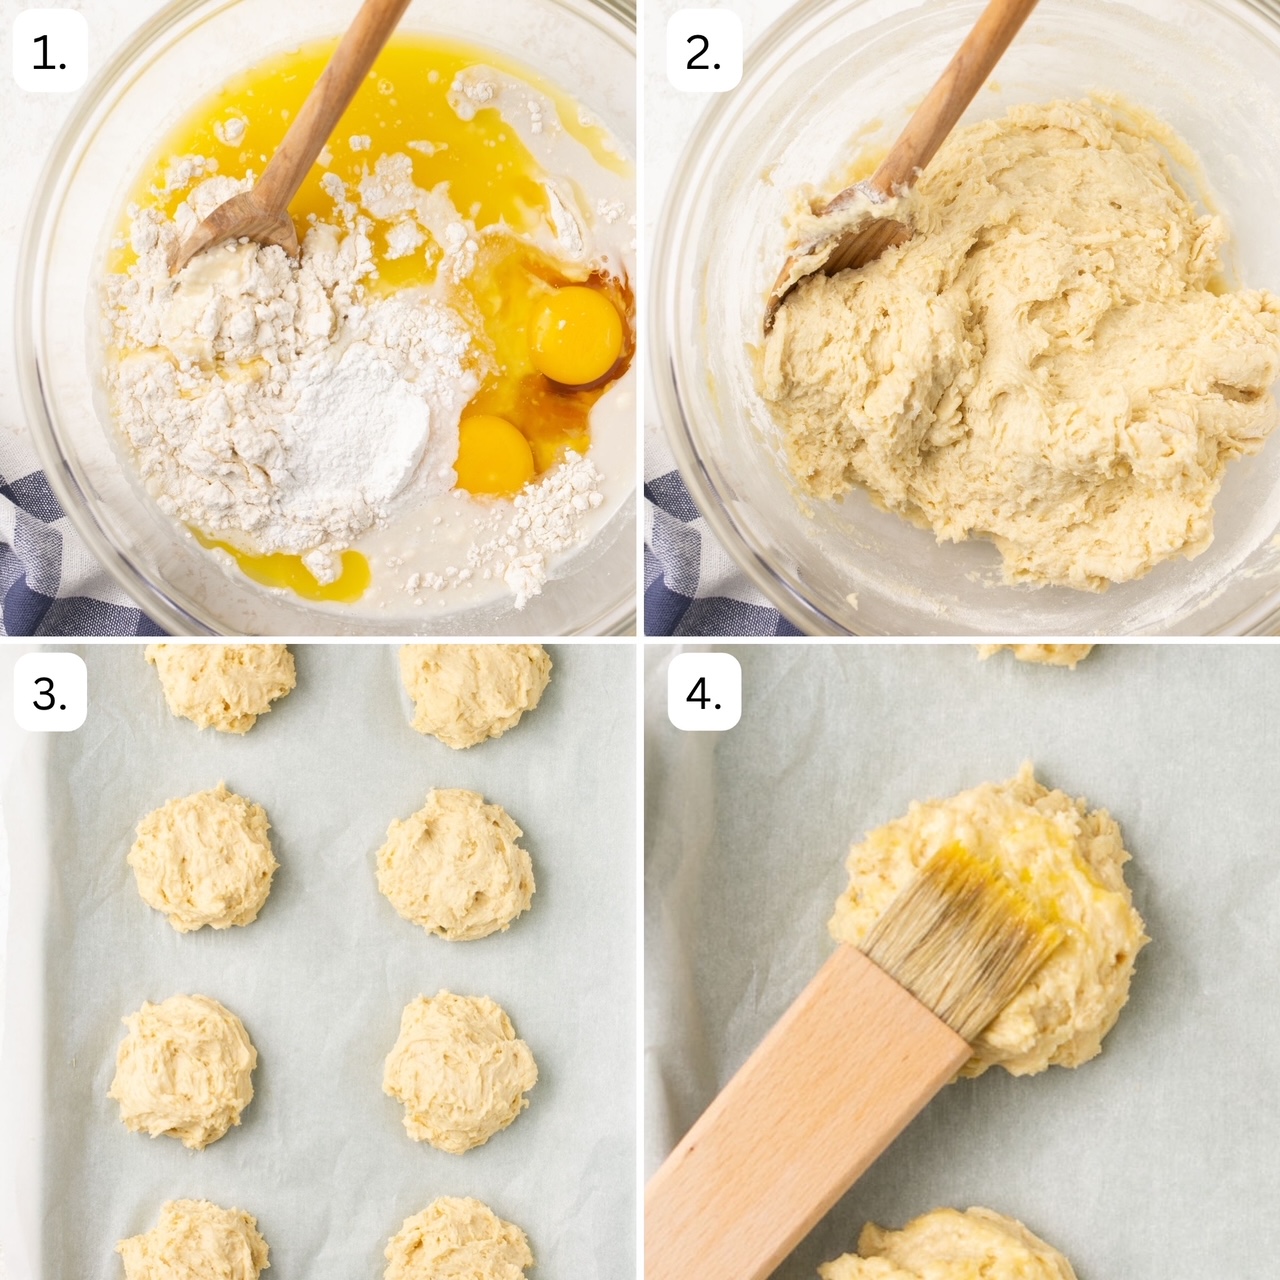 steps for making gluten free biscuits in 4 quadrants